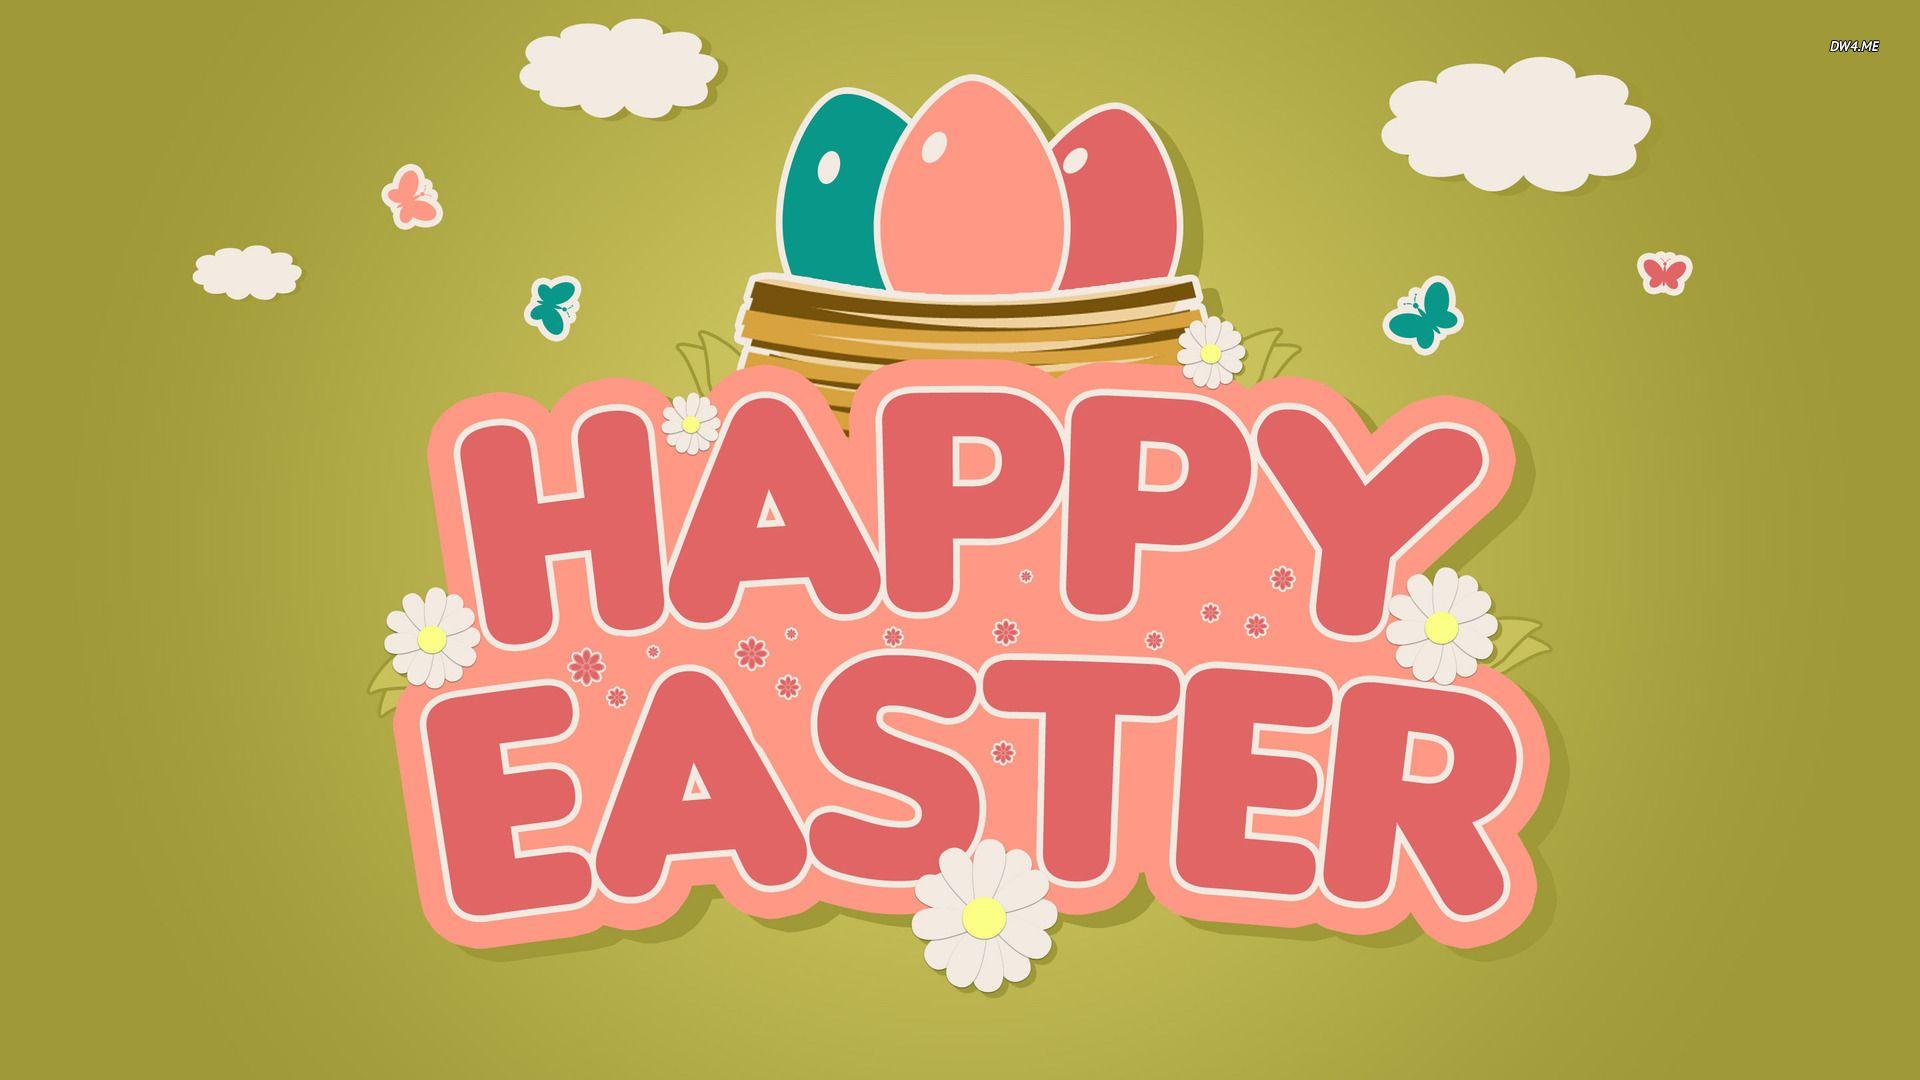 Easter HD Image Easter 2019 Image, Easter Picture, Photo